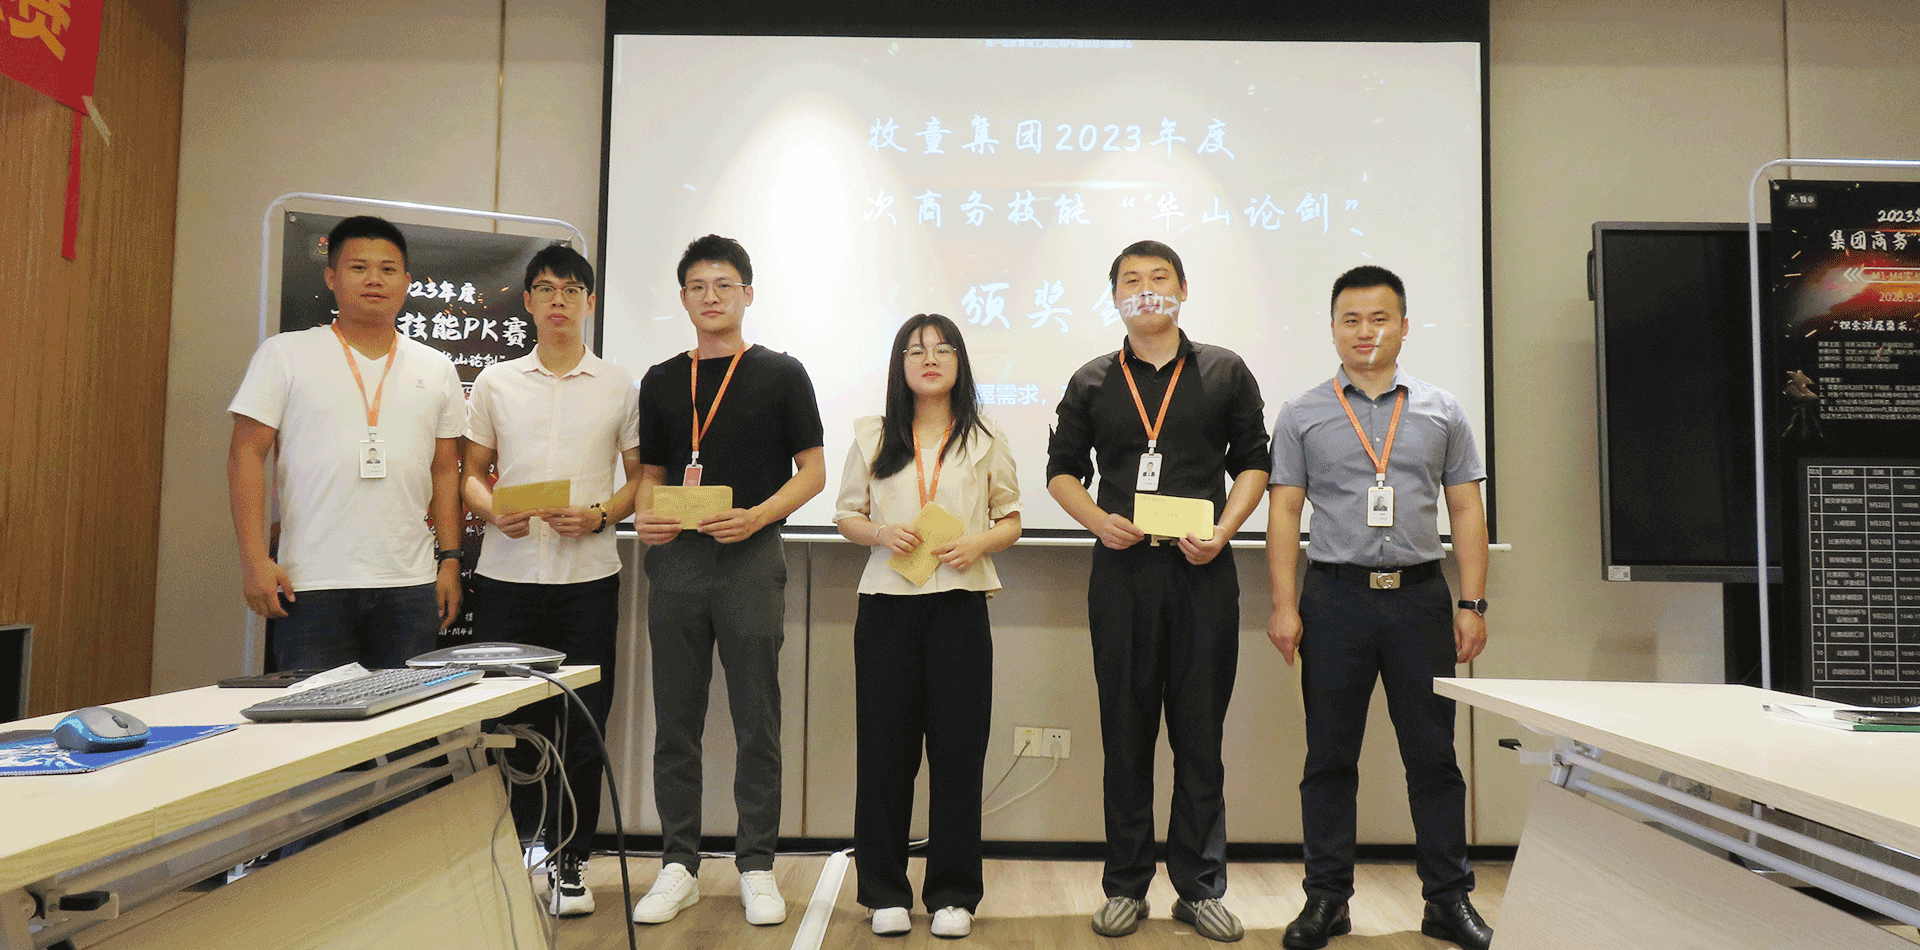 Cowboy Group Organized the International Sales Business Skills Competition Events